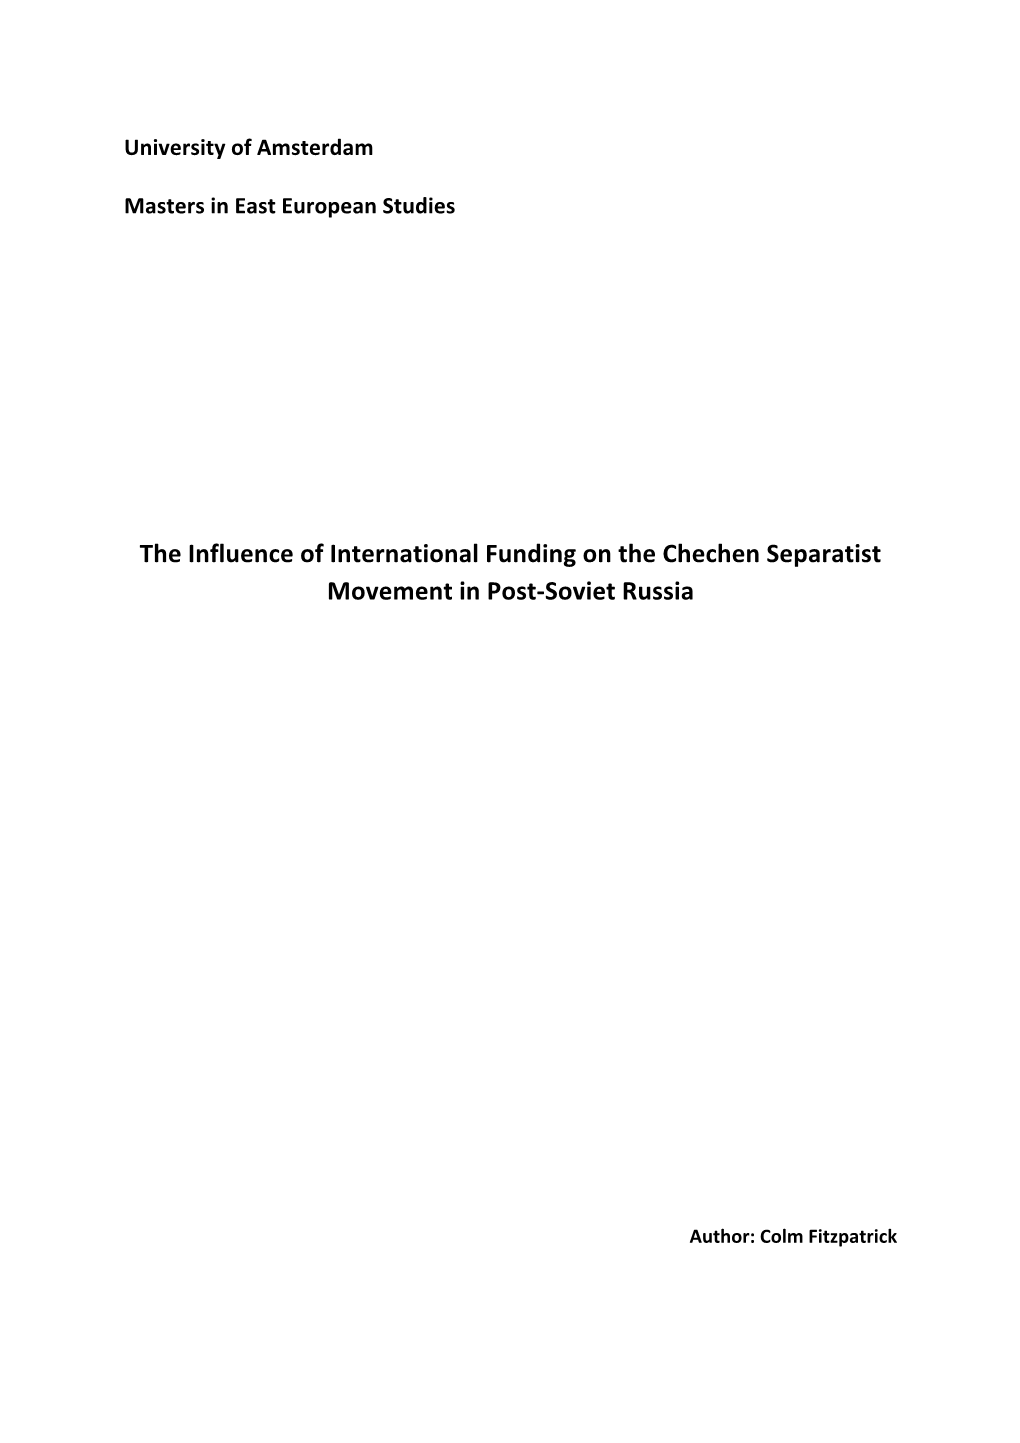 The Influence of International Funding on the Chechen Separatist Movement in Post-Soviet Russia